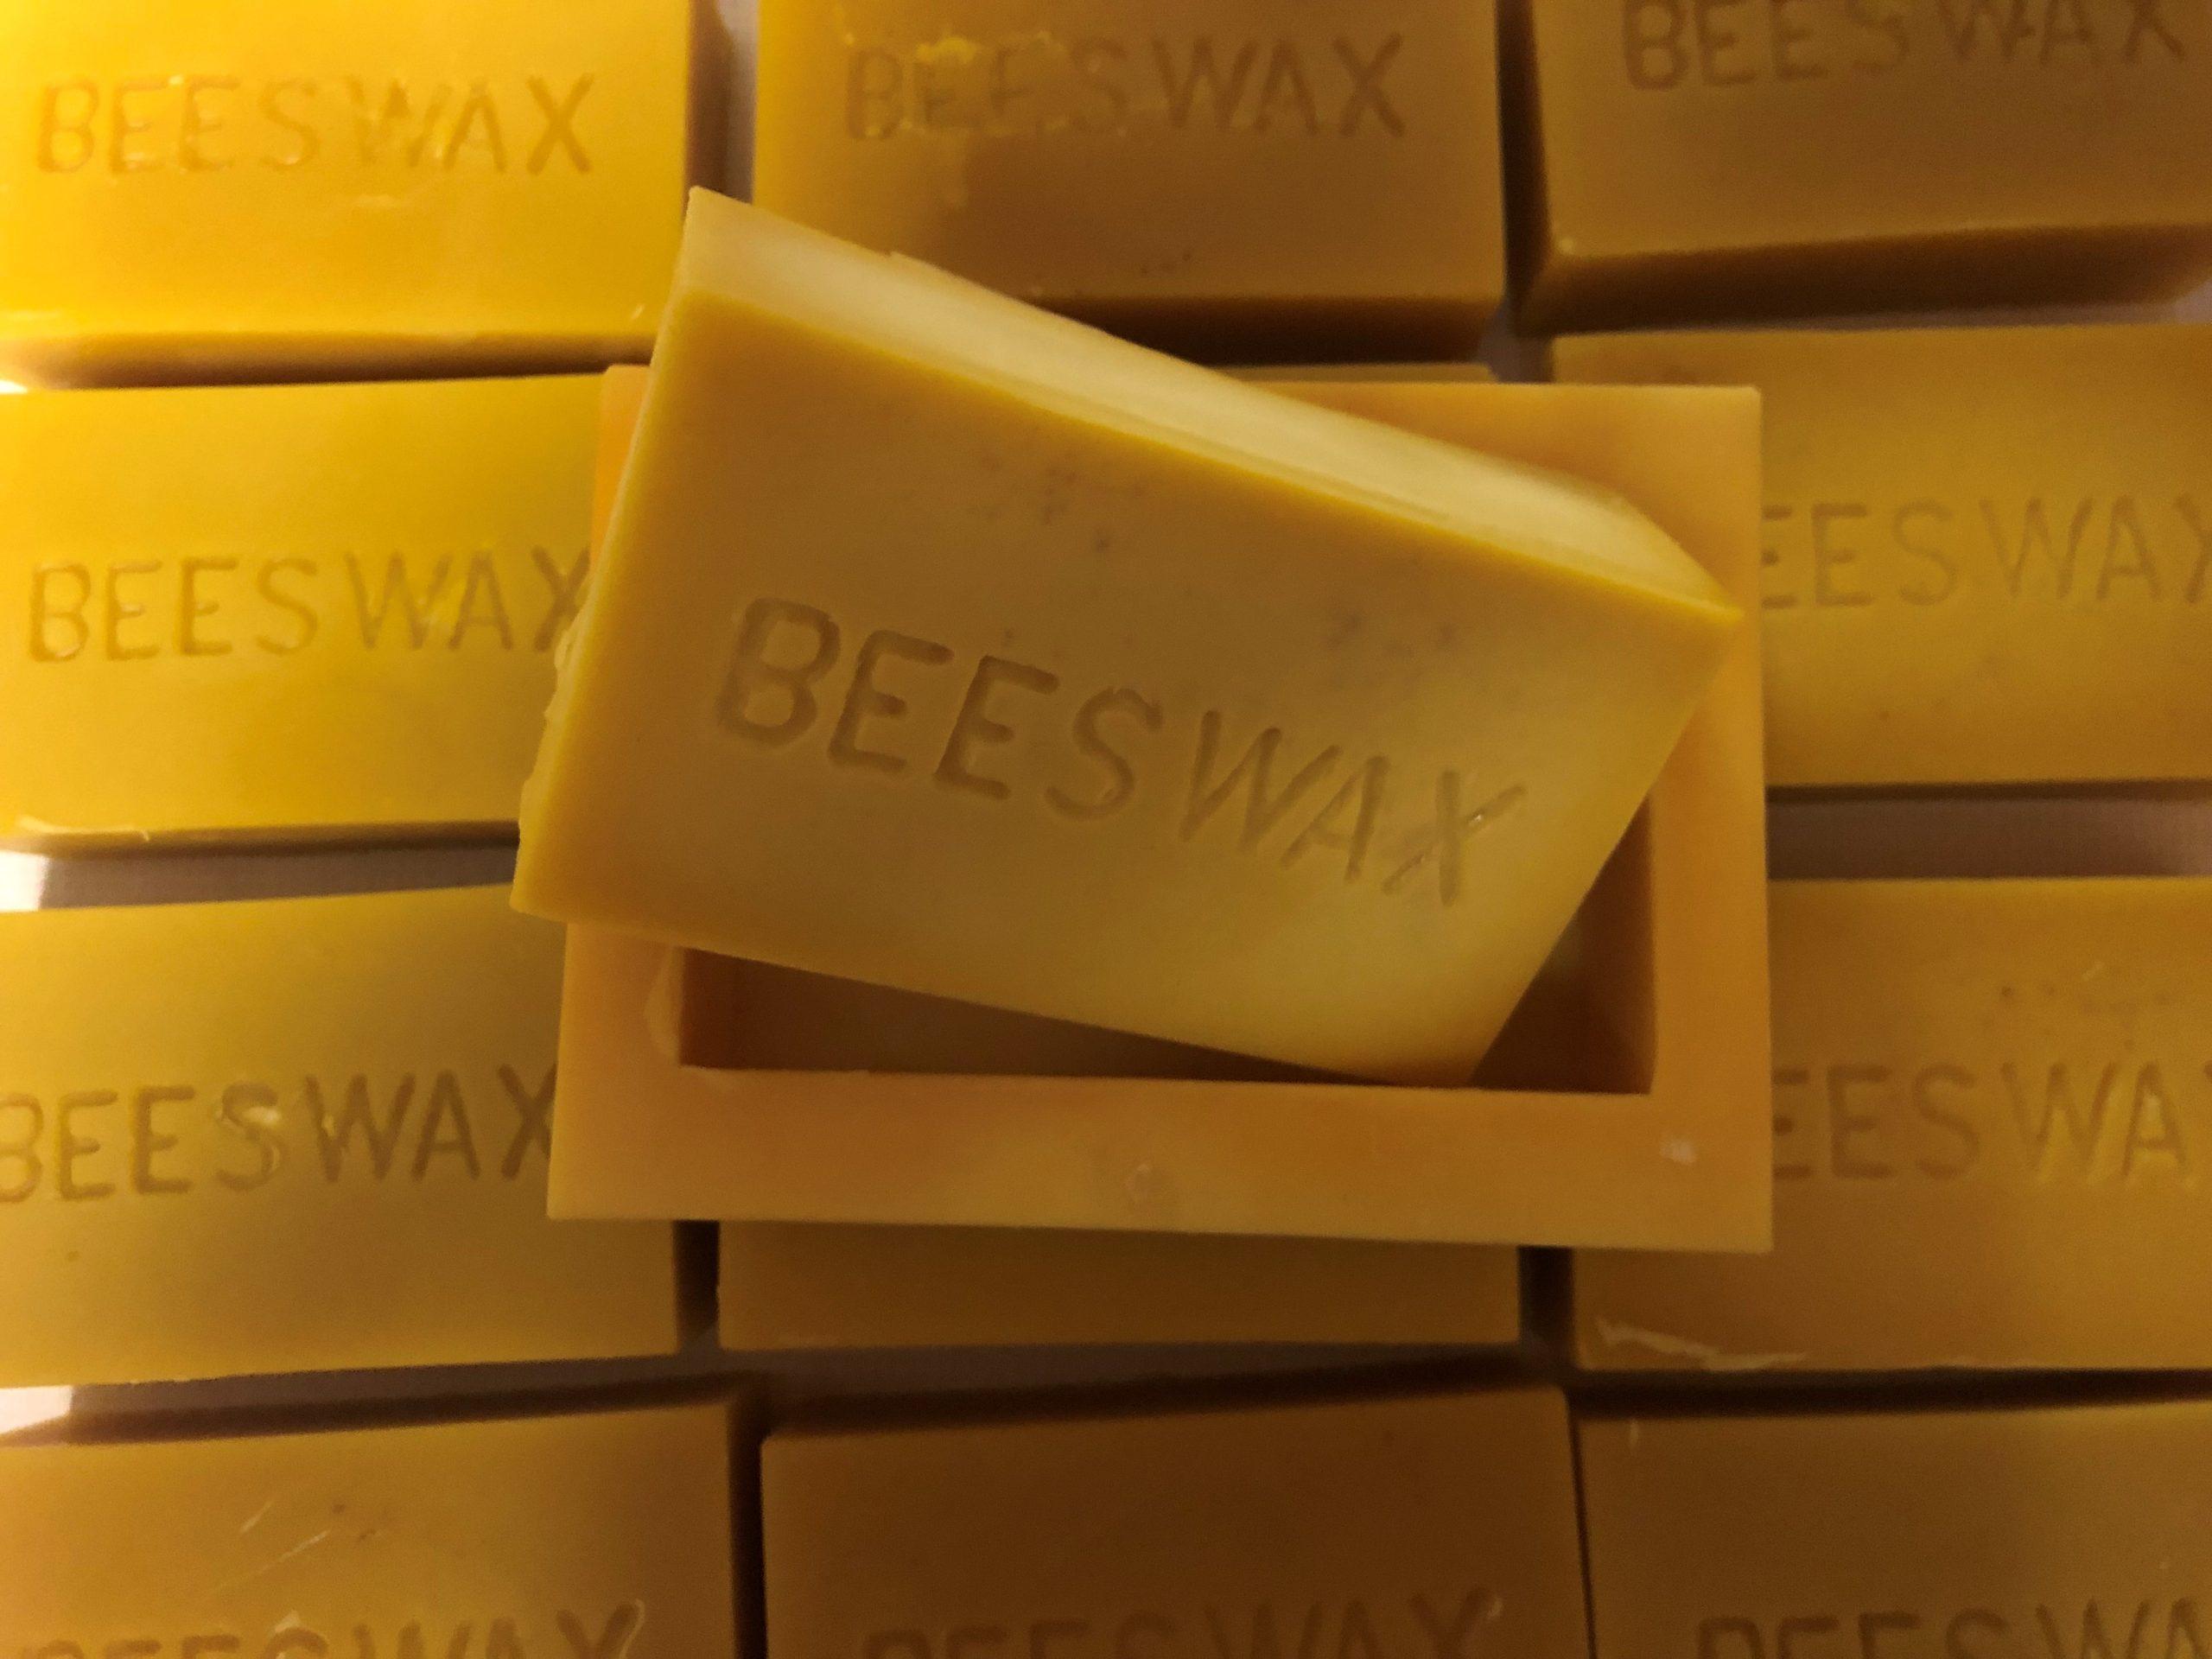 Raw Beeswax Blocks for candles and projects - Meyer Bees